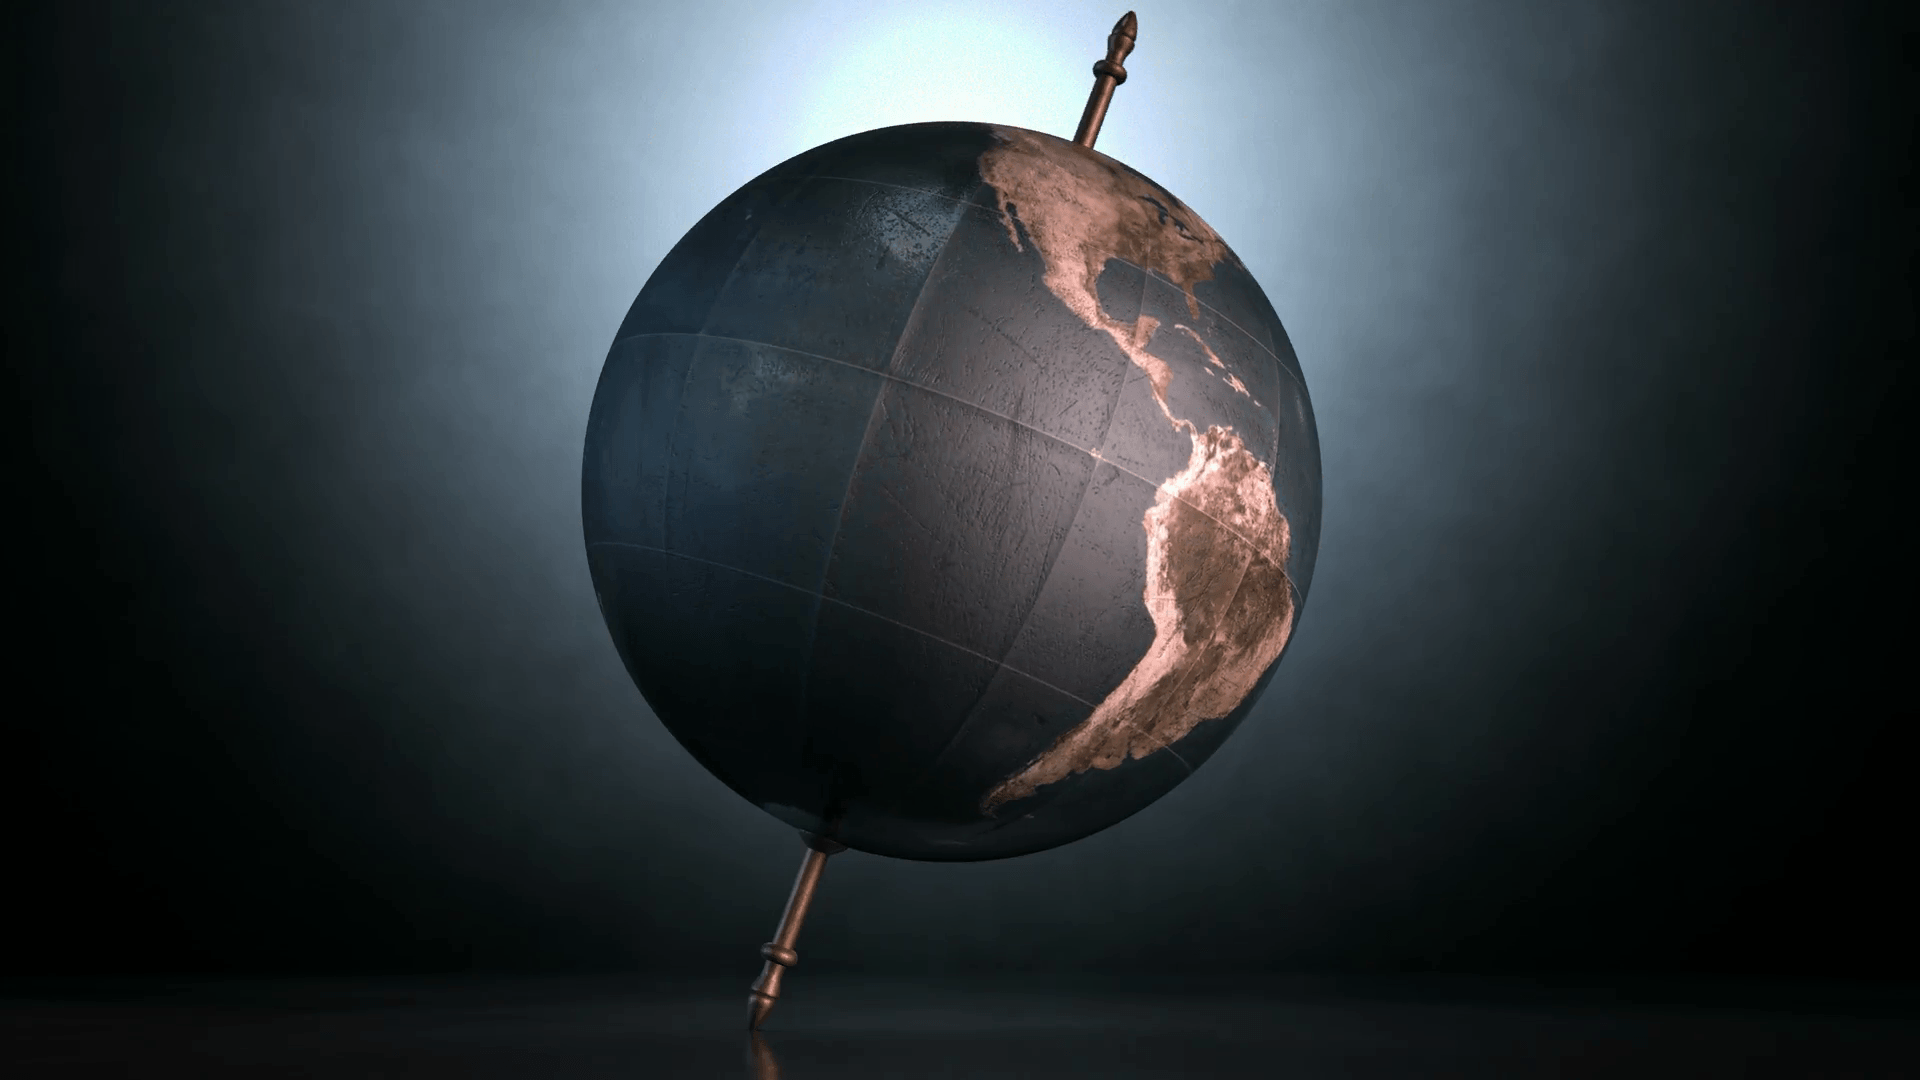 A static view of a world globe ornament spinning on a tilted axis on